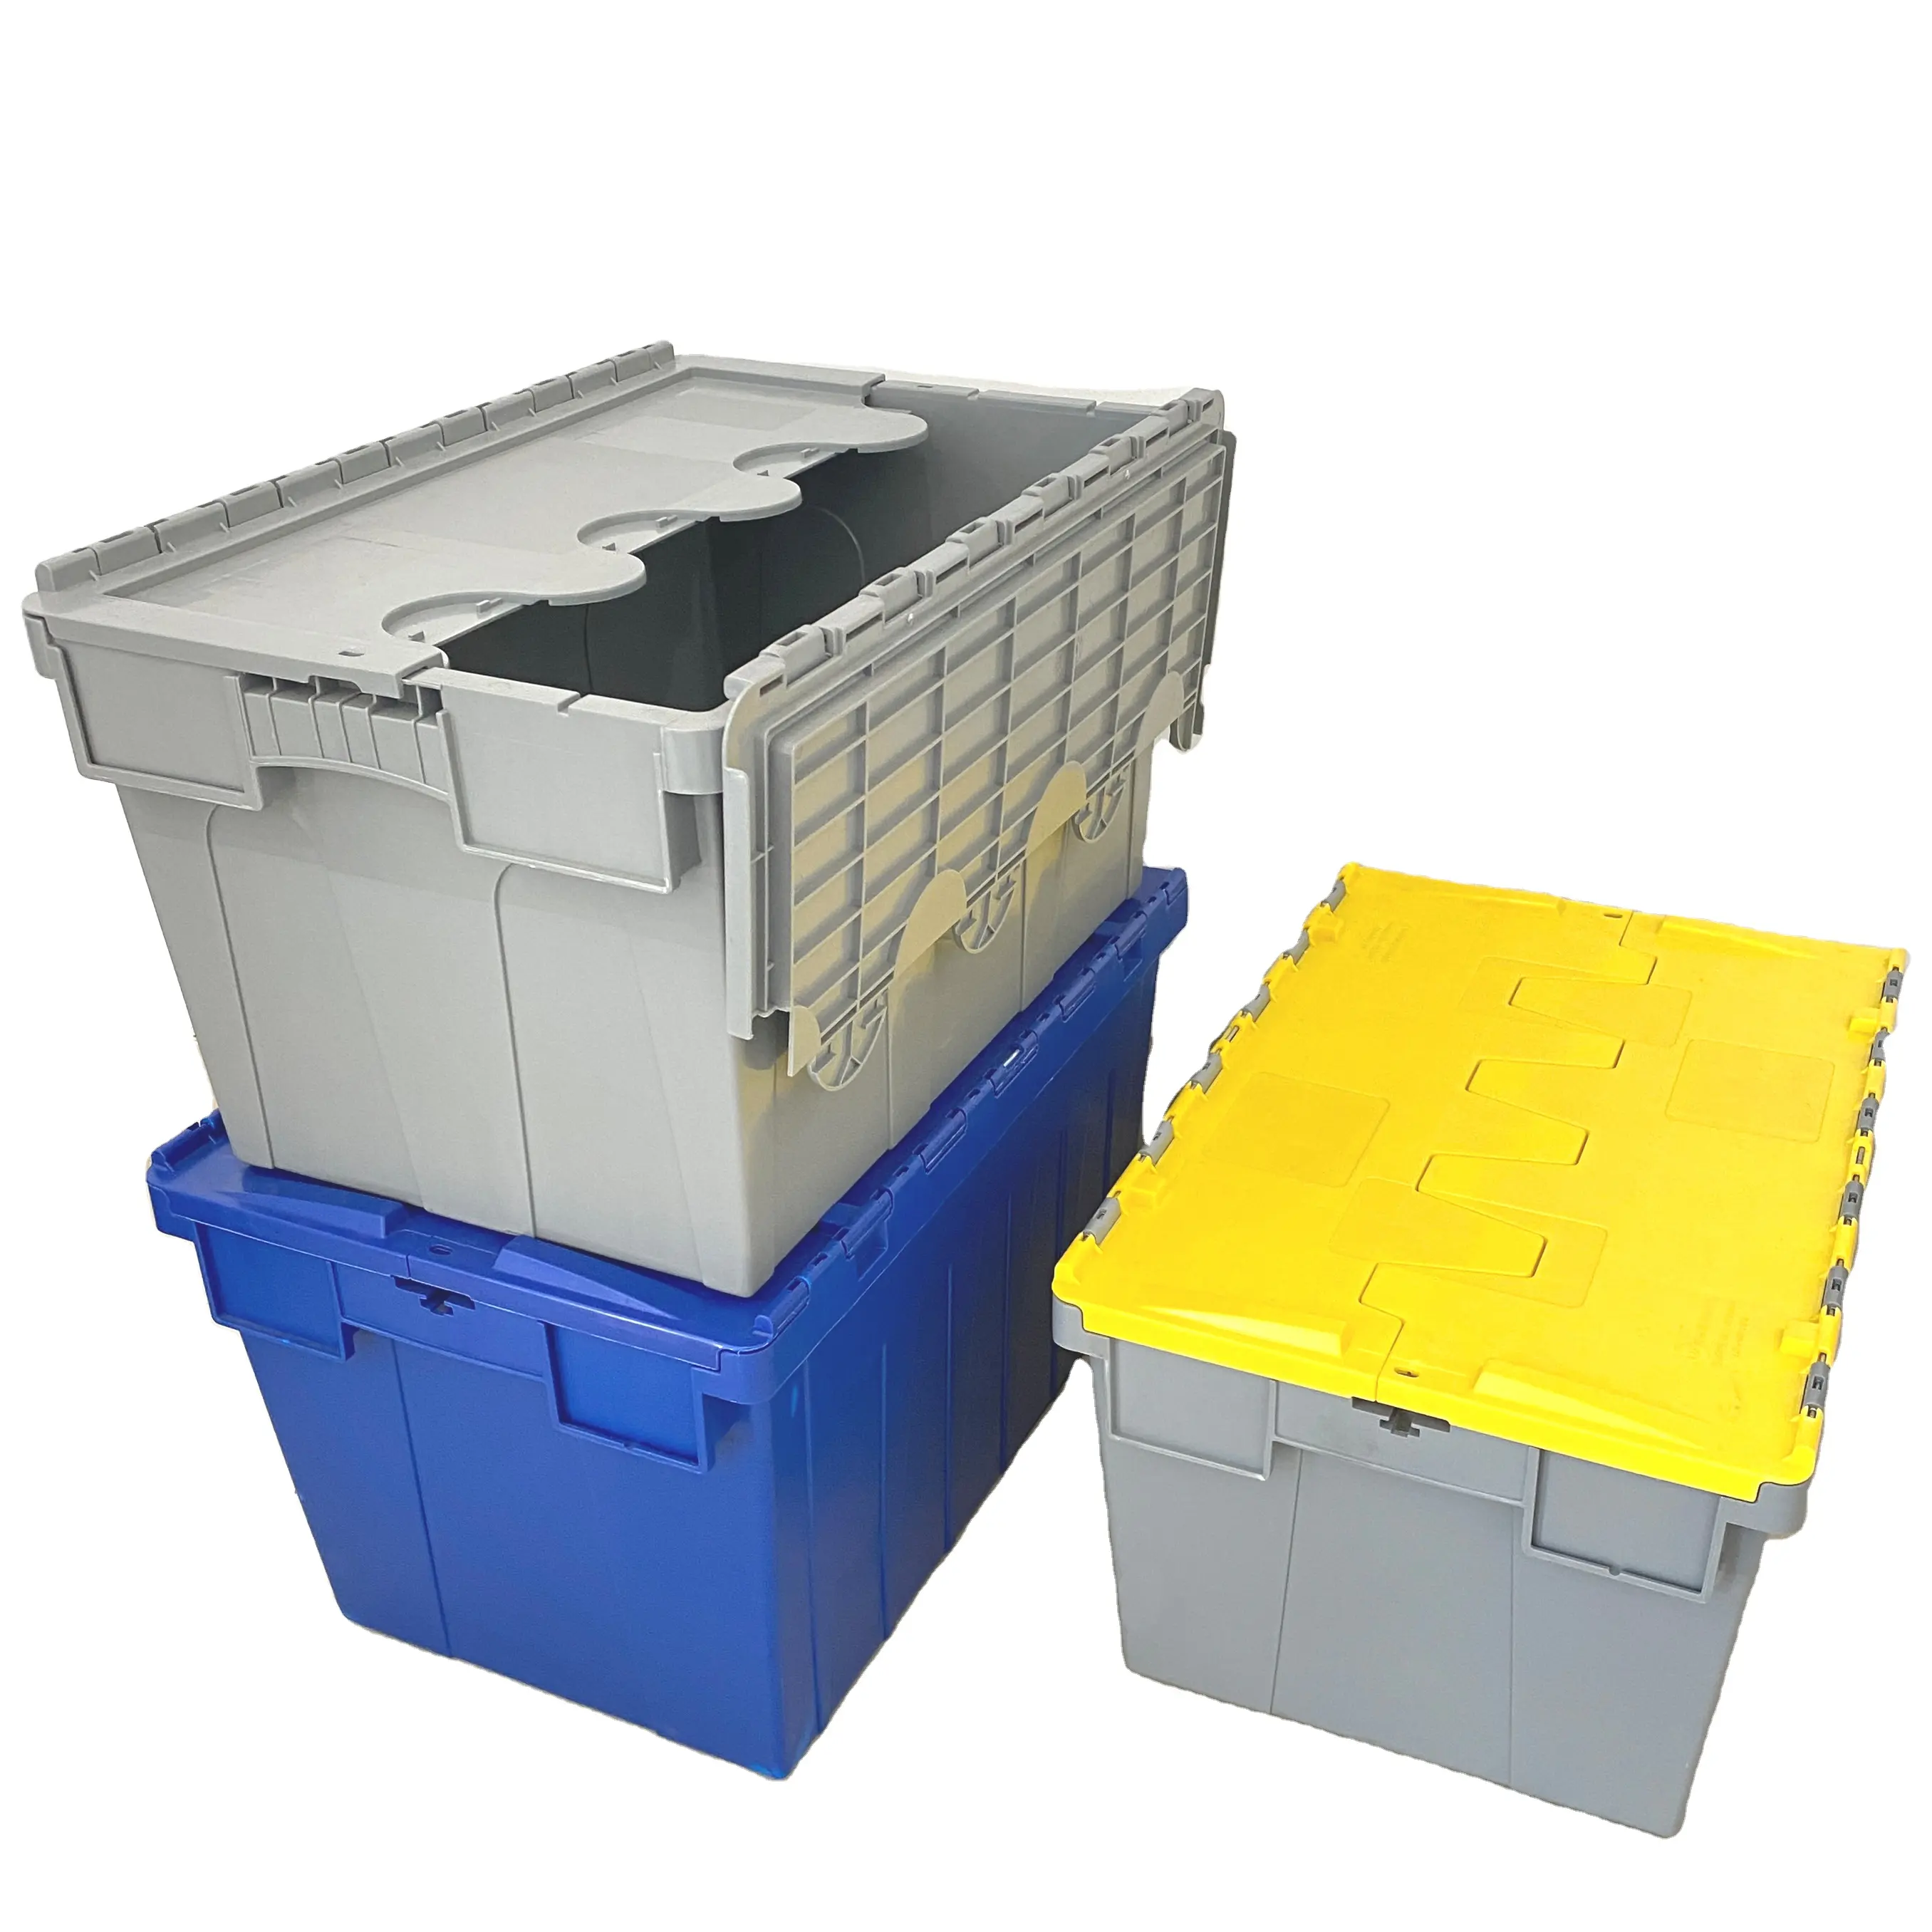 Heavy duty plastic nestable moving crates stackable storage attached lid tote plastic storage bins with lids